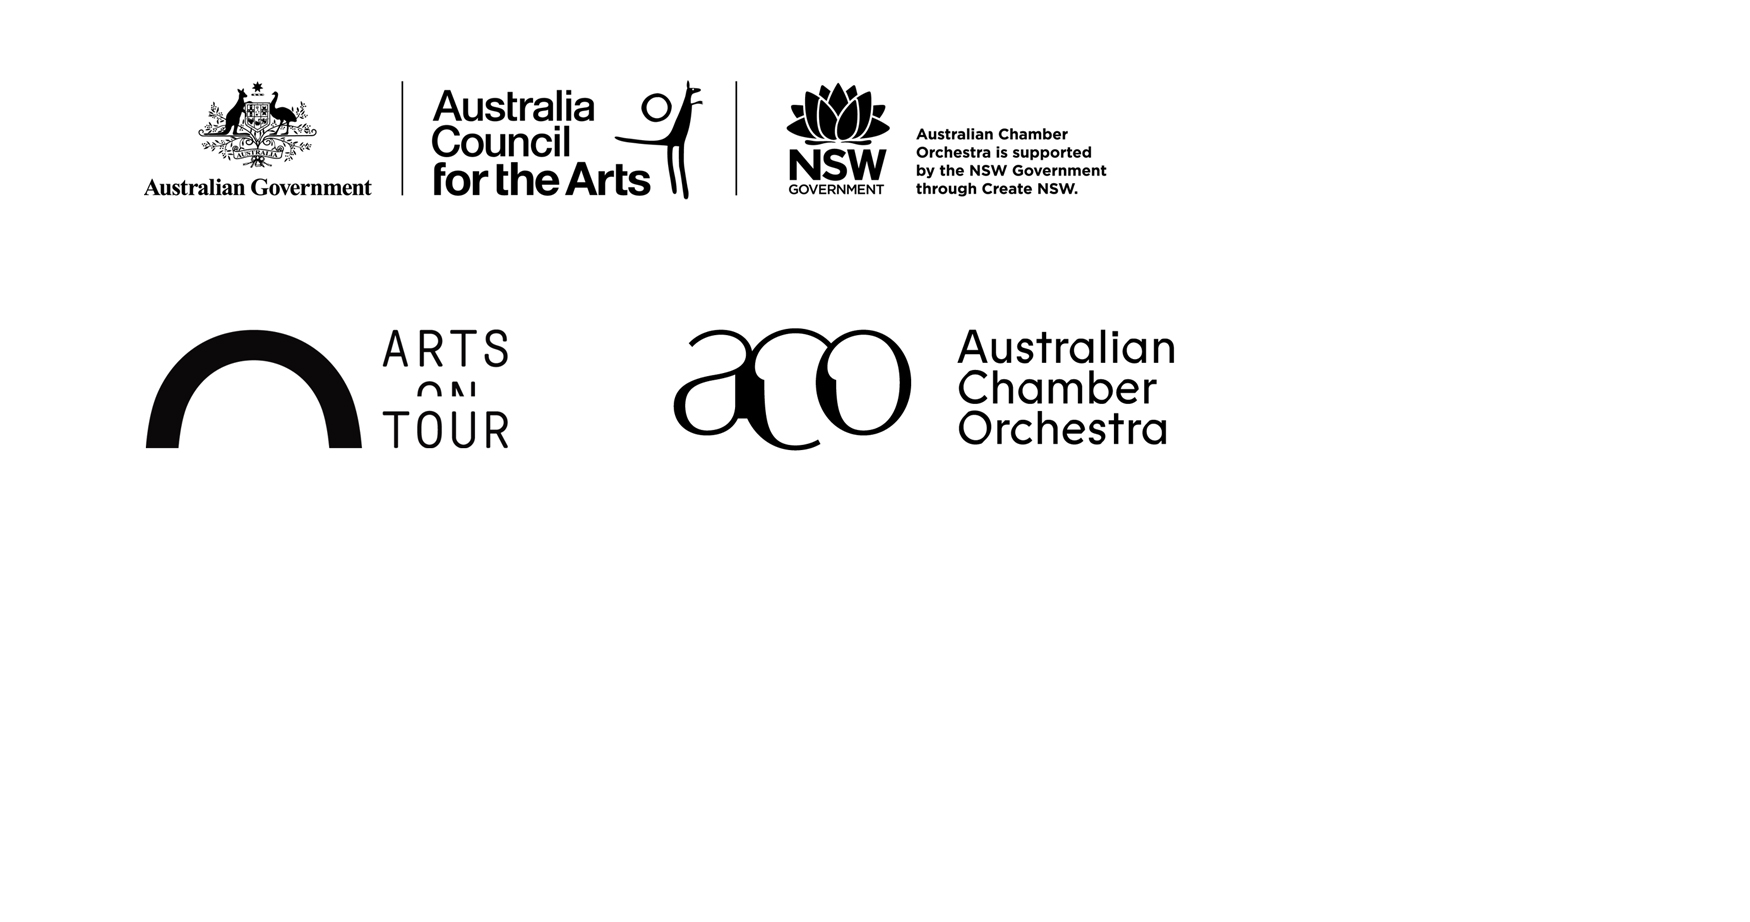 Australia Council for Arts' logo in black on a white background. Arts on Tour and Australian Chamber Orchestra logos in black sit underneath. They are all on a white background. 